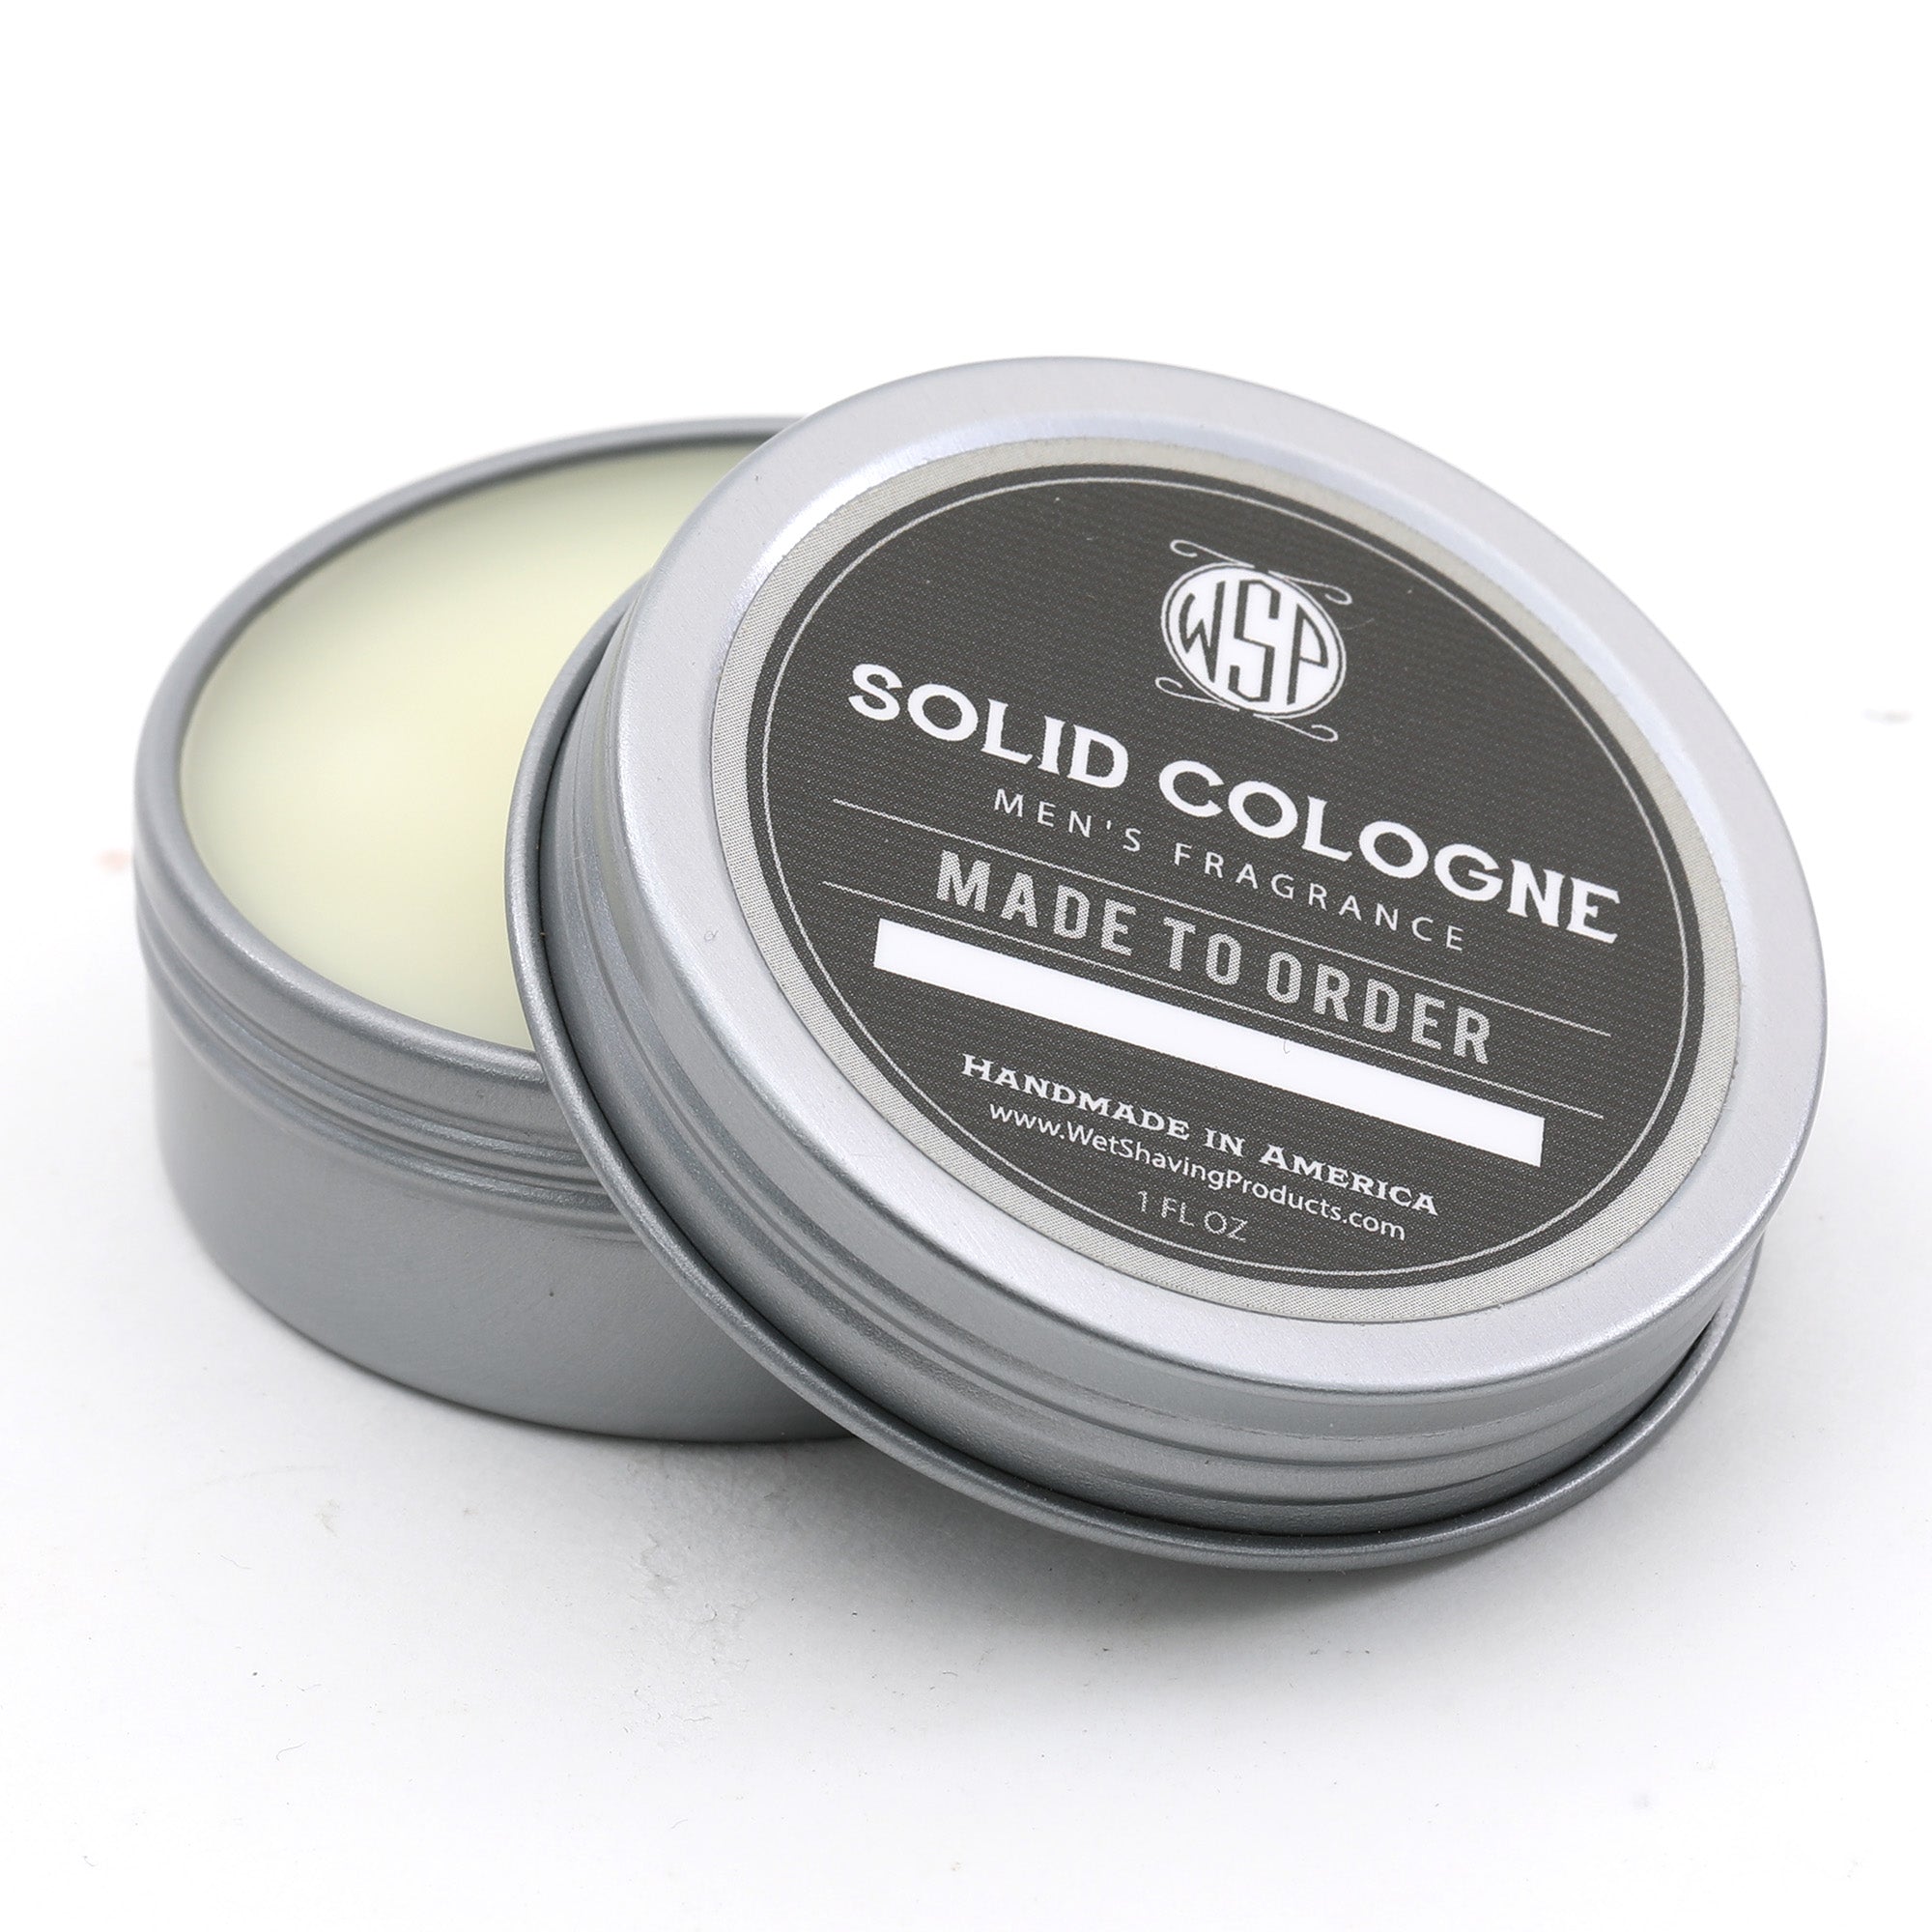 Solid Cologne EdP Strength (Scented to Order) 1 oz in tin